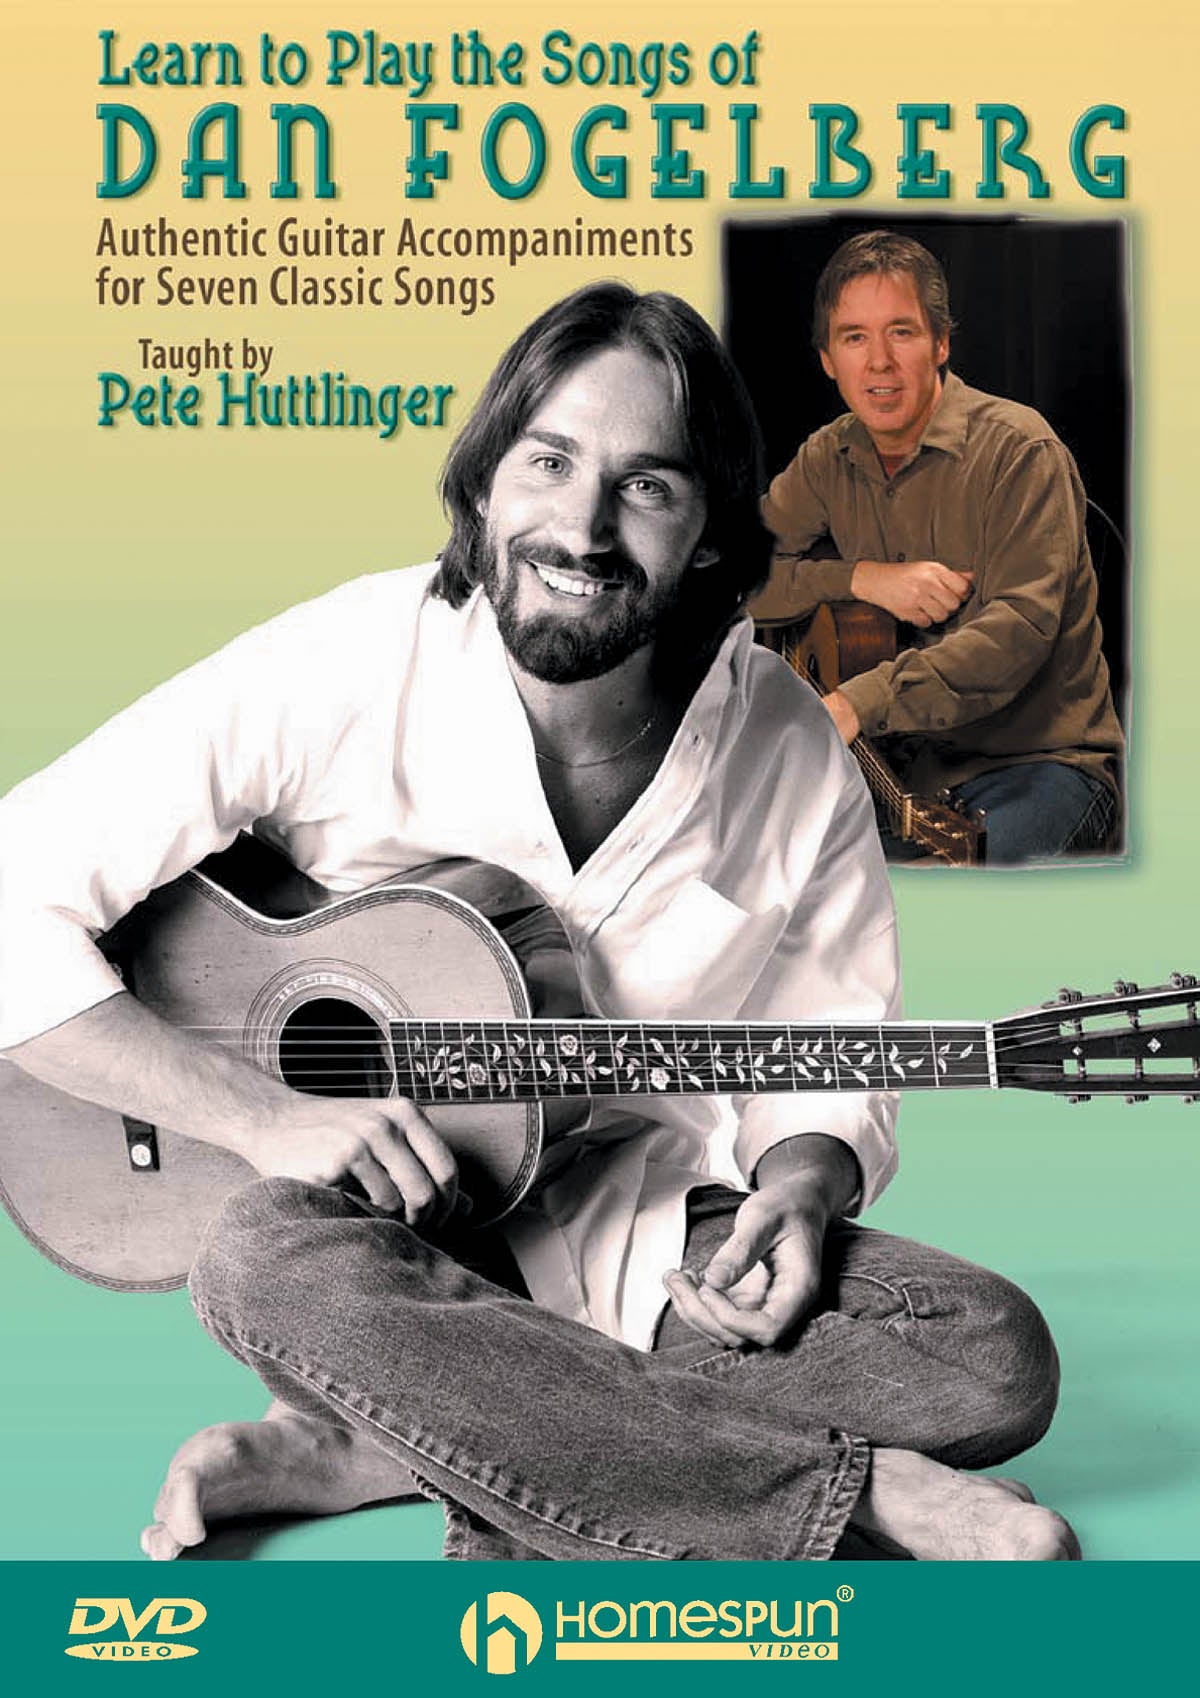 Learn to Play the Songs of Dan Fogelberg Two Video Set - Homespun